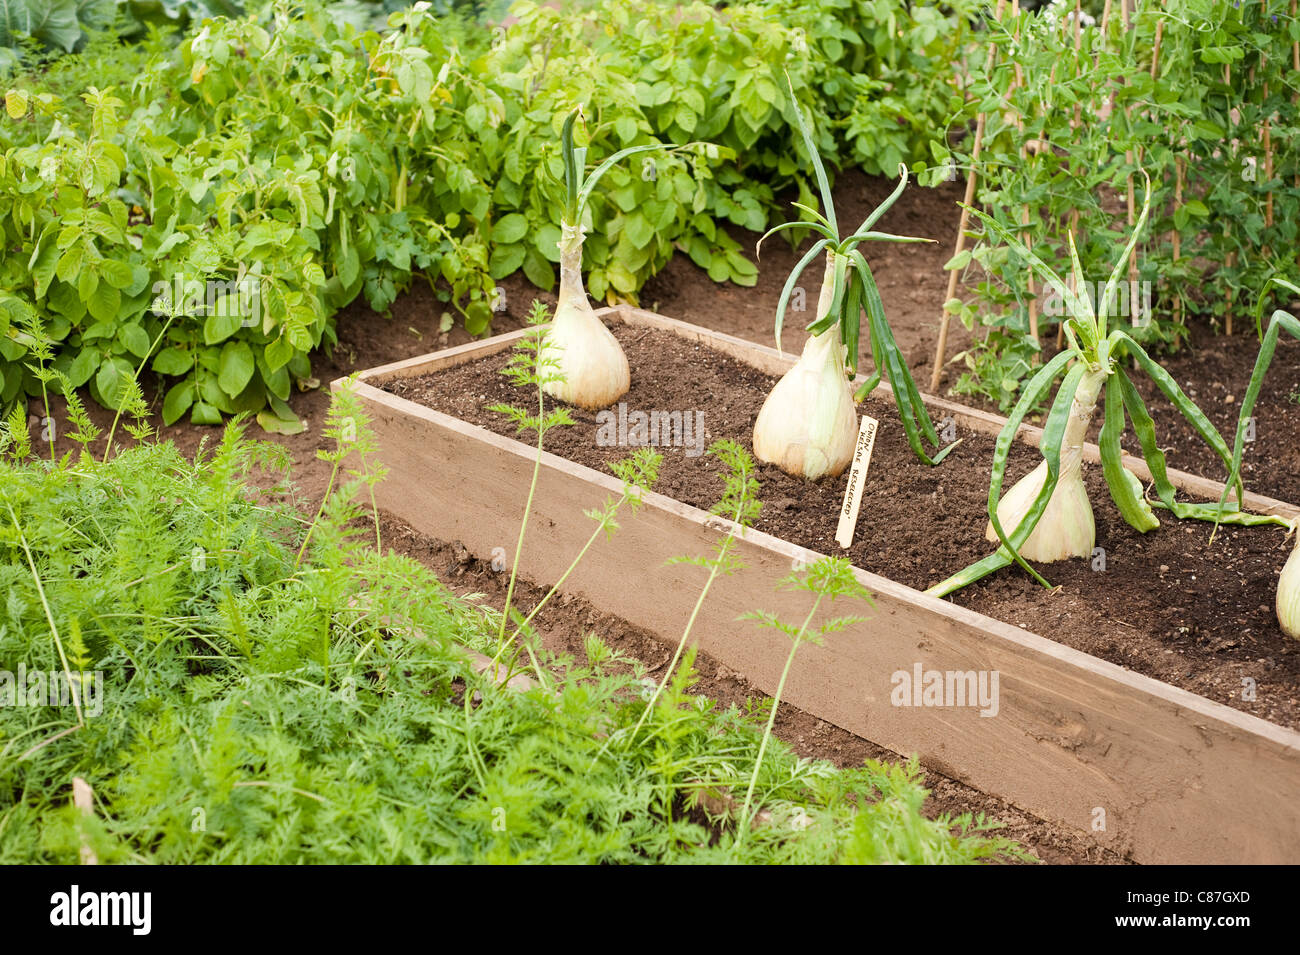 Onion ‘Kelsae Reselected’ growing in a raised bed Stock Photo